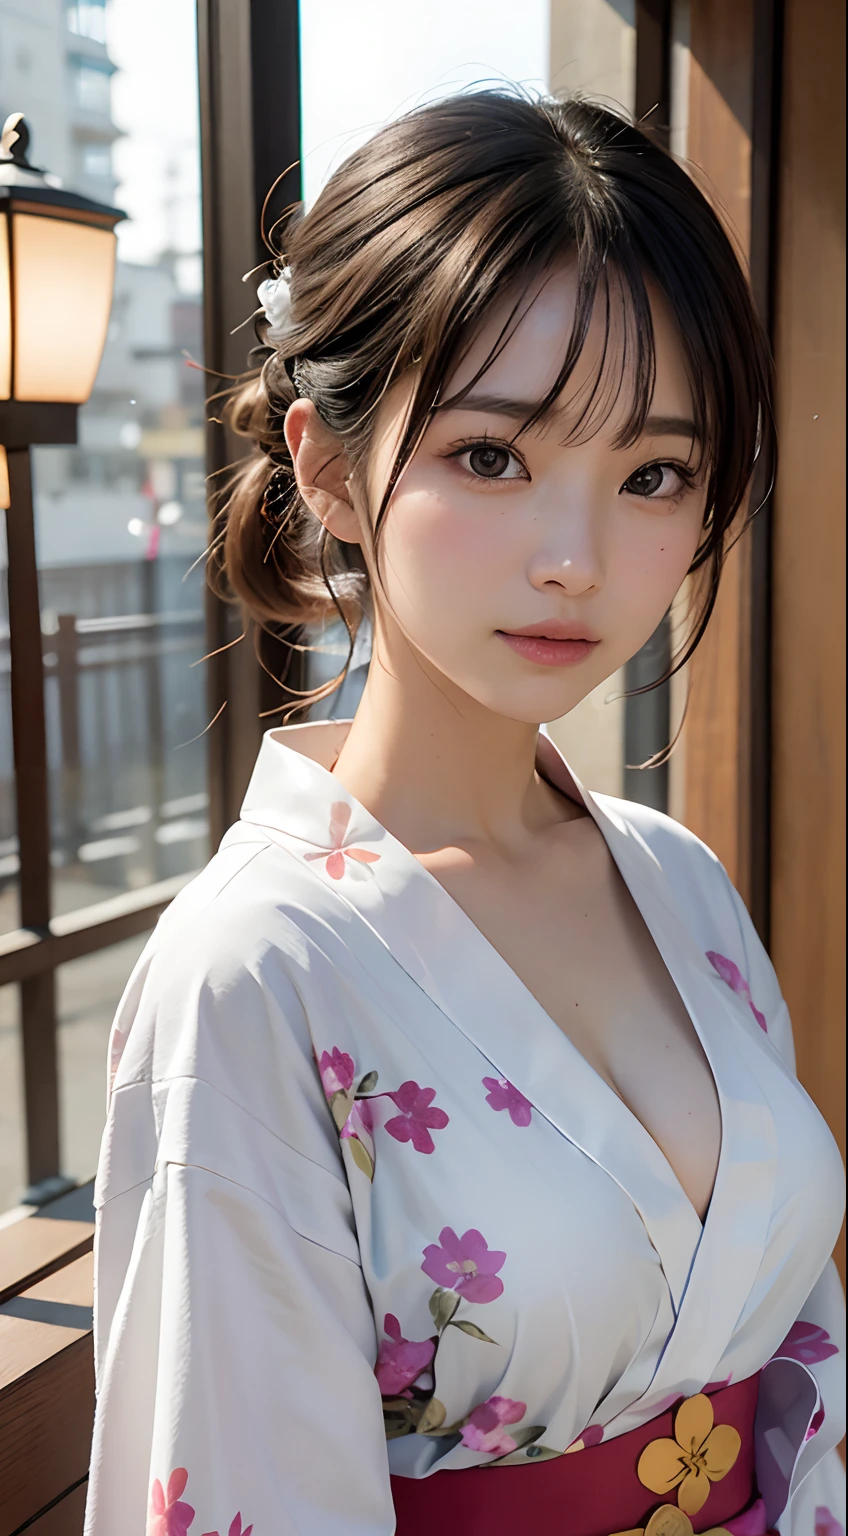 (masutepiece, Best Quality:1.4), Beautiful face, 8K, 85 mm, absurderes, (floral pattern yukata:1.4), The upper part of the body, Exposing breasts、 violaceaess, gardeniass, Delicate girl, Solo, Night, Looking at Viewer, Upper body, Film grain, chromatic abberation, Sharp Focus, face lights, Professional Lighting, Sophisticated, (Smile:0.4), cleavage, (Simple background, Bokeh background:1.2), Detail Face